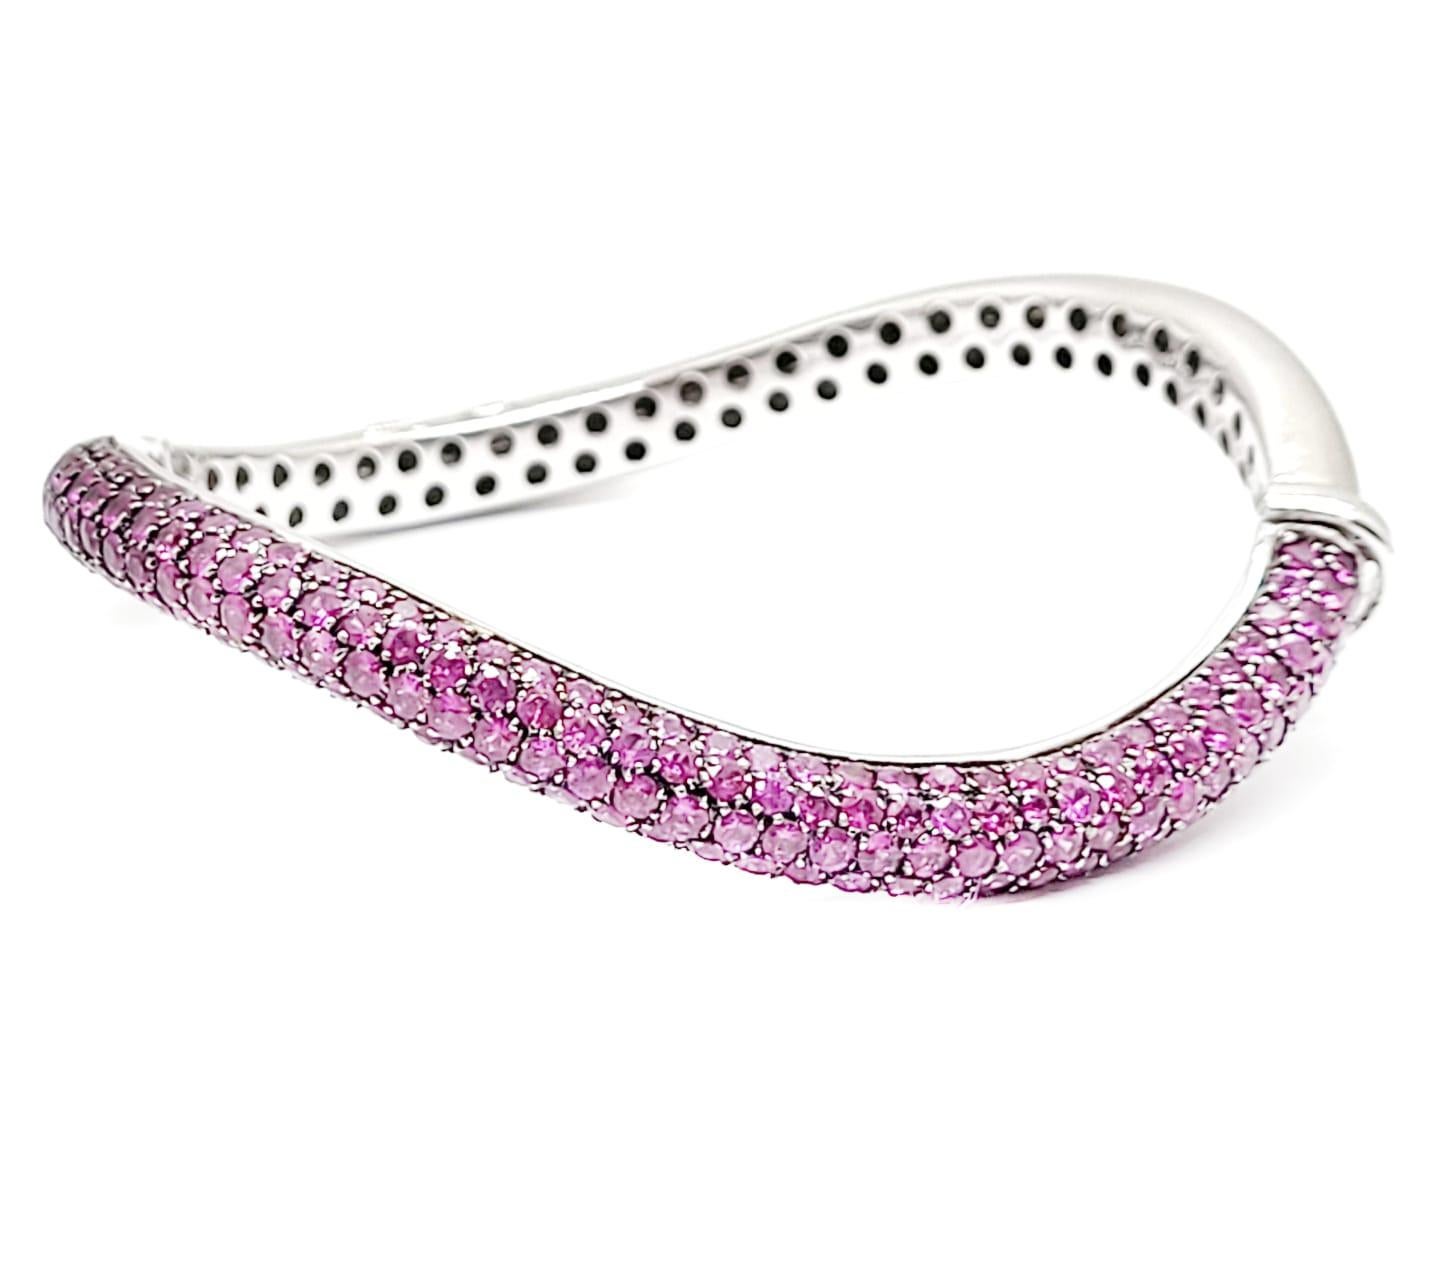 Andreoli Pink Sapphire 18 Karat White Gold Bracelet

This bracelet features:
- 10.25 Carat Pink Sapphire
- 41.15 Gram 18K White Gold
- Made In Italy